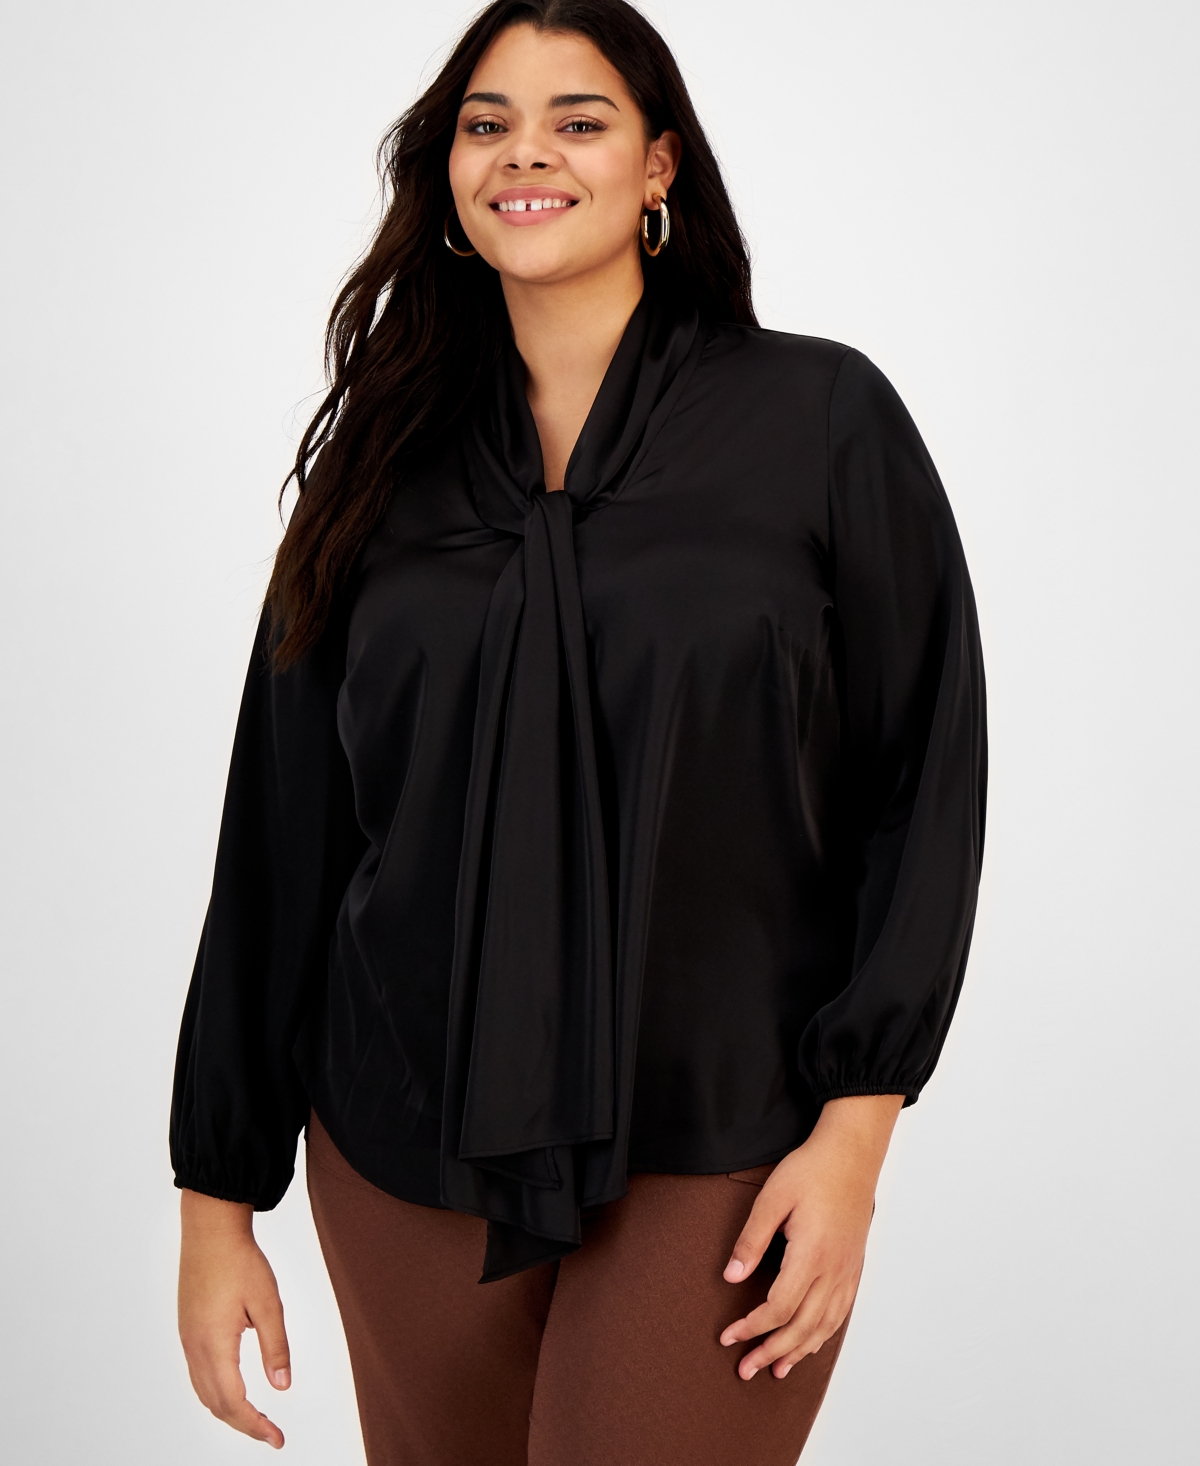 BAR III PLUS SIZE BOW-TIE LONG-SLEEVE BLOUSE, CREATED FOR MACY'S